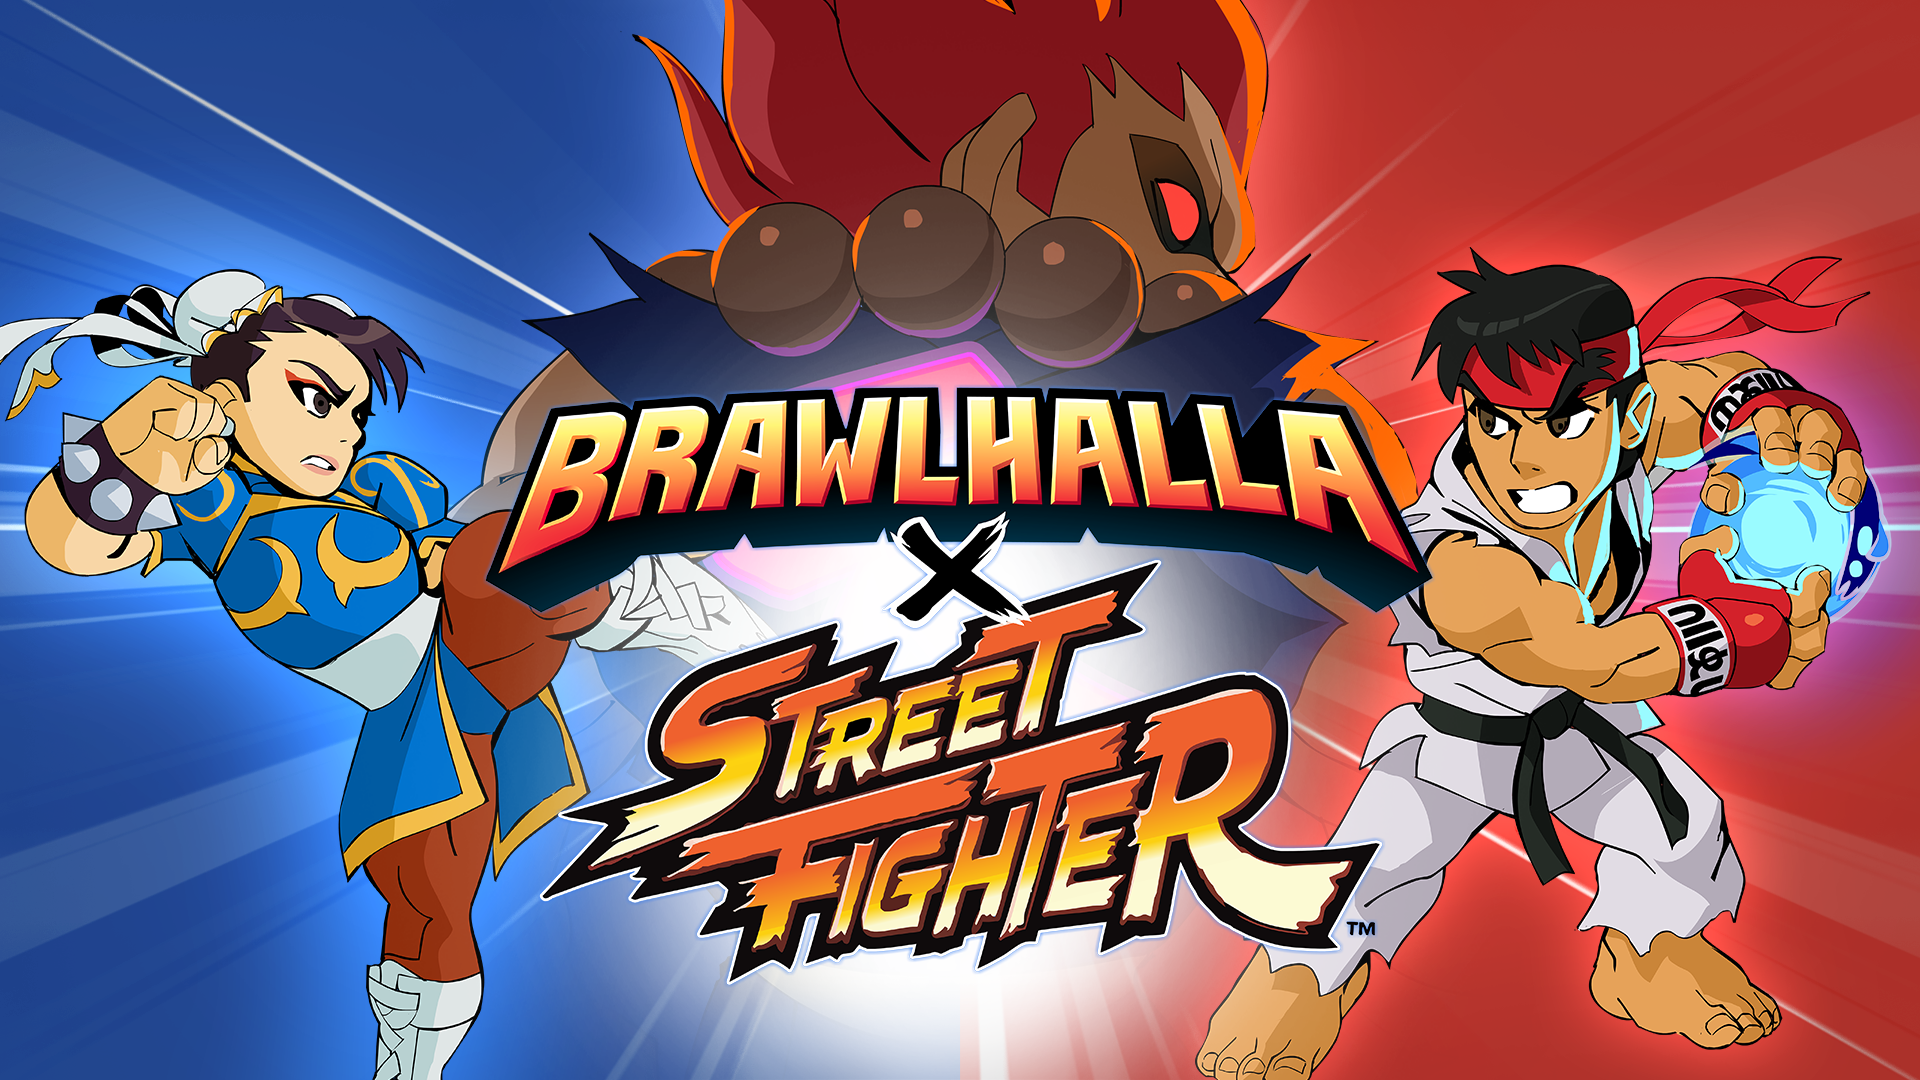 Brawlhalla x Street Fighter is Coming November 22!